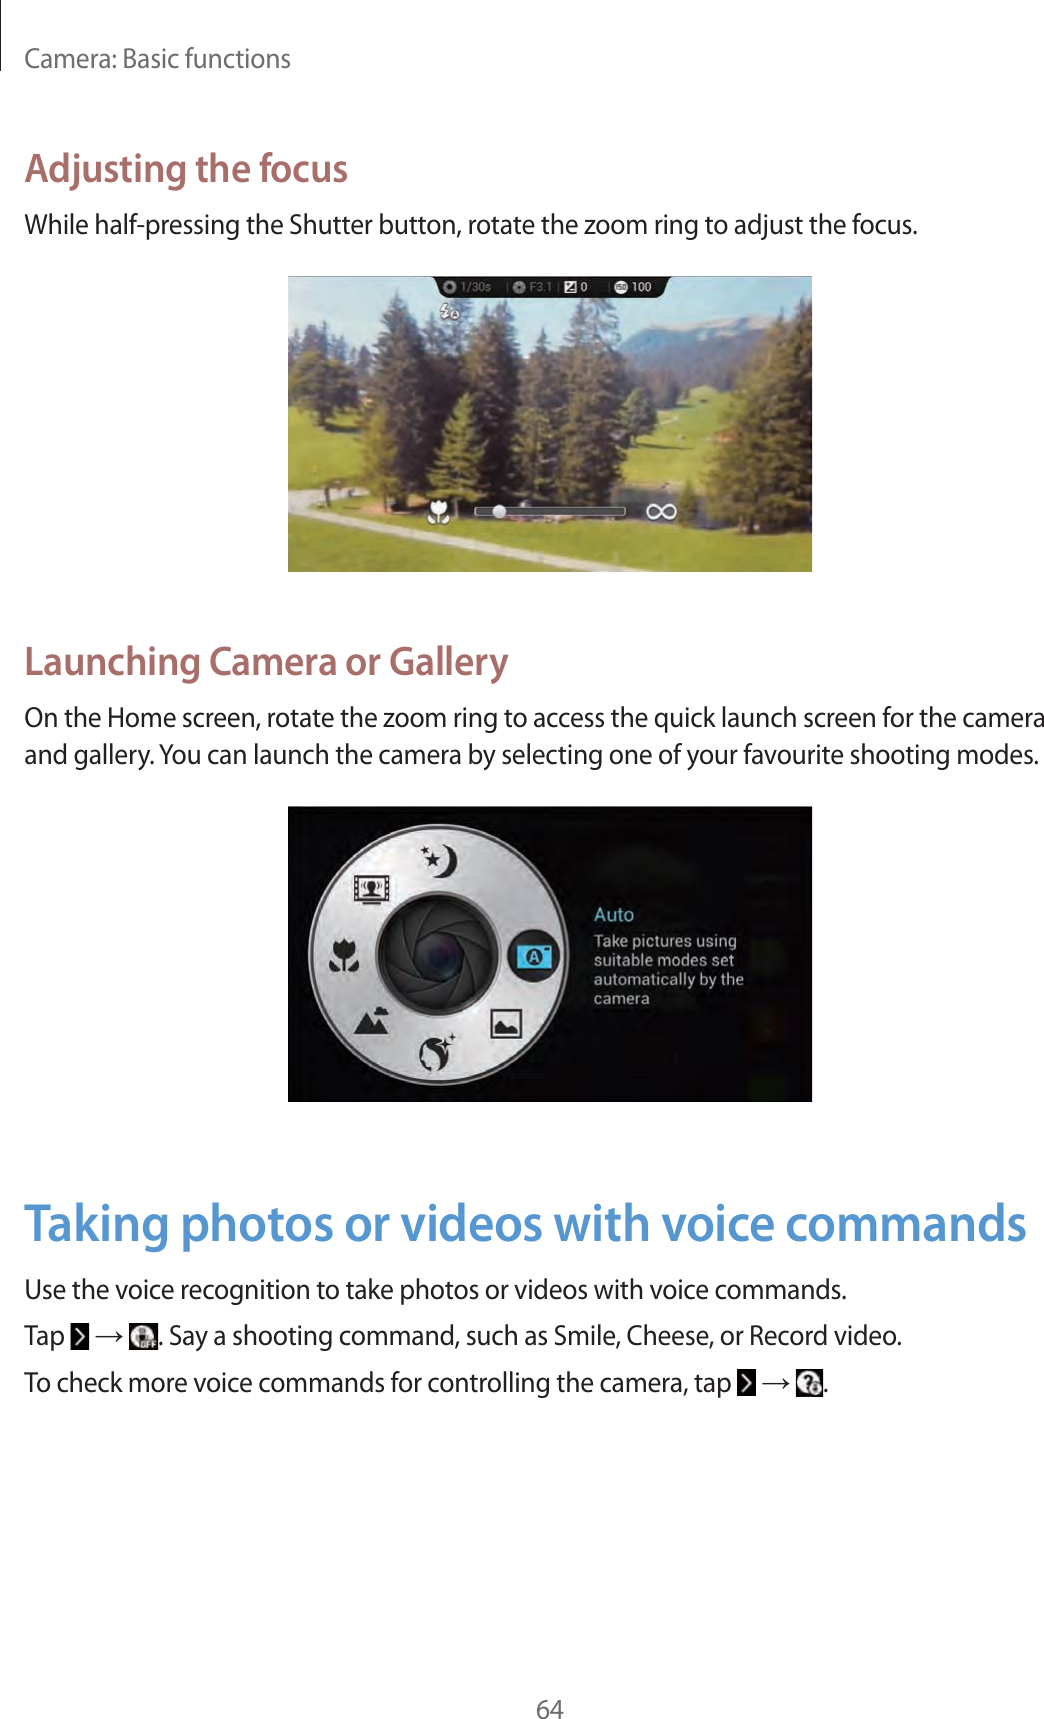 Camera: Basic functions64Adjusting the focusWhile half-pressing the Shutter button, rotate the zoom ring to adjust the focus.Launching Camera or GalleryOn the Home screen, rotate the zoom ring to access the quick launch screen for the camera and gallery. You can launch the camera by selecting one of your favourite shooting modes.Taking photos or videos with voice commandsUse the voice recognition to take photos or videos with voice commands.Tap   ĺ . Say a shooting command, such as Smile, Cheese, or Record video.To check more voice commands for controlling the camera, tap   ĺ  .